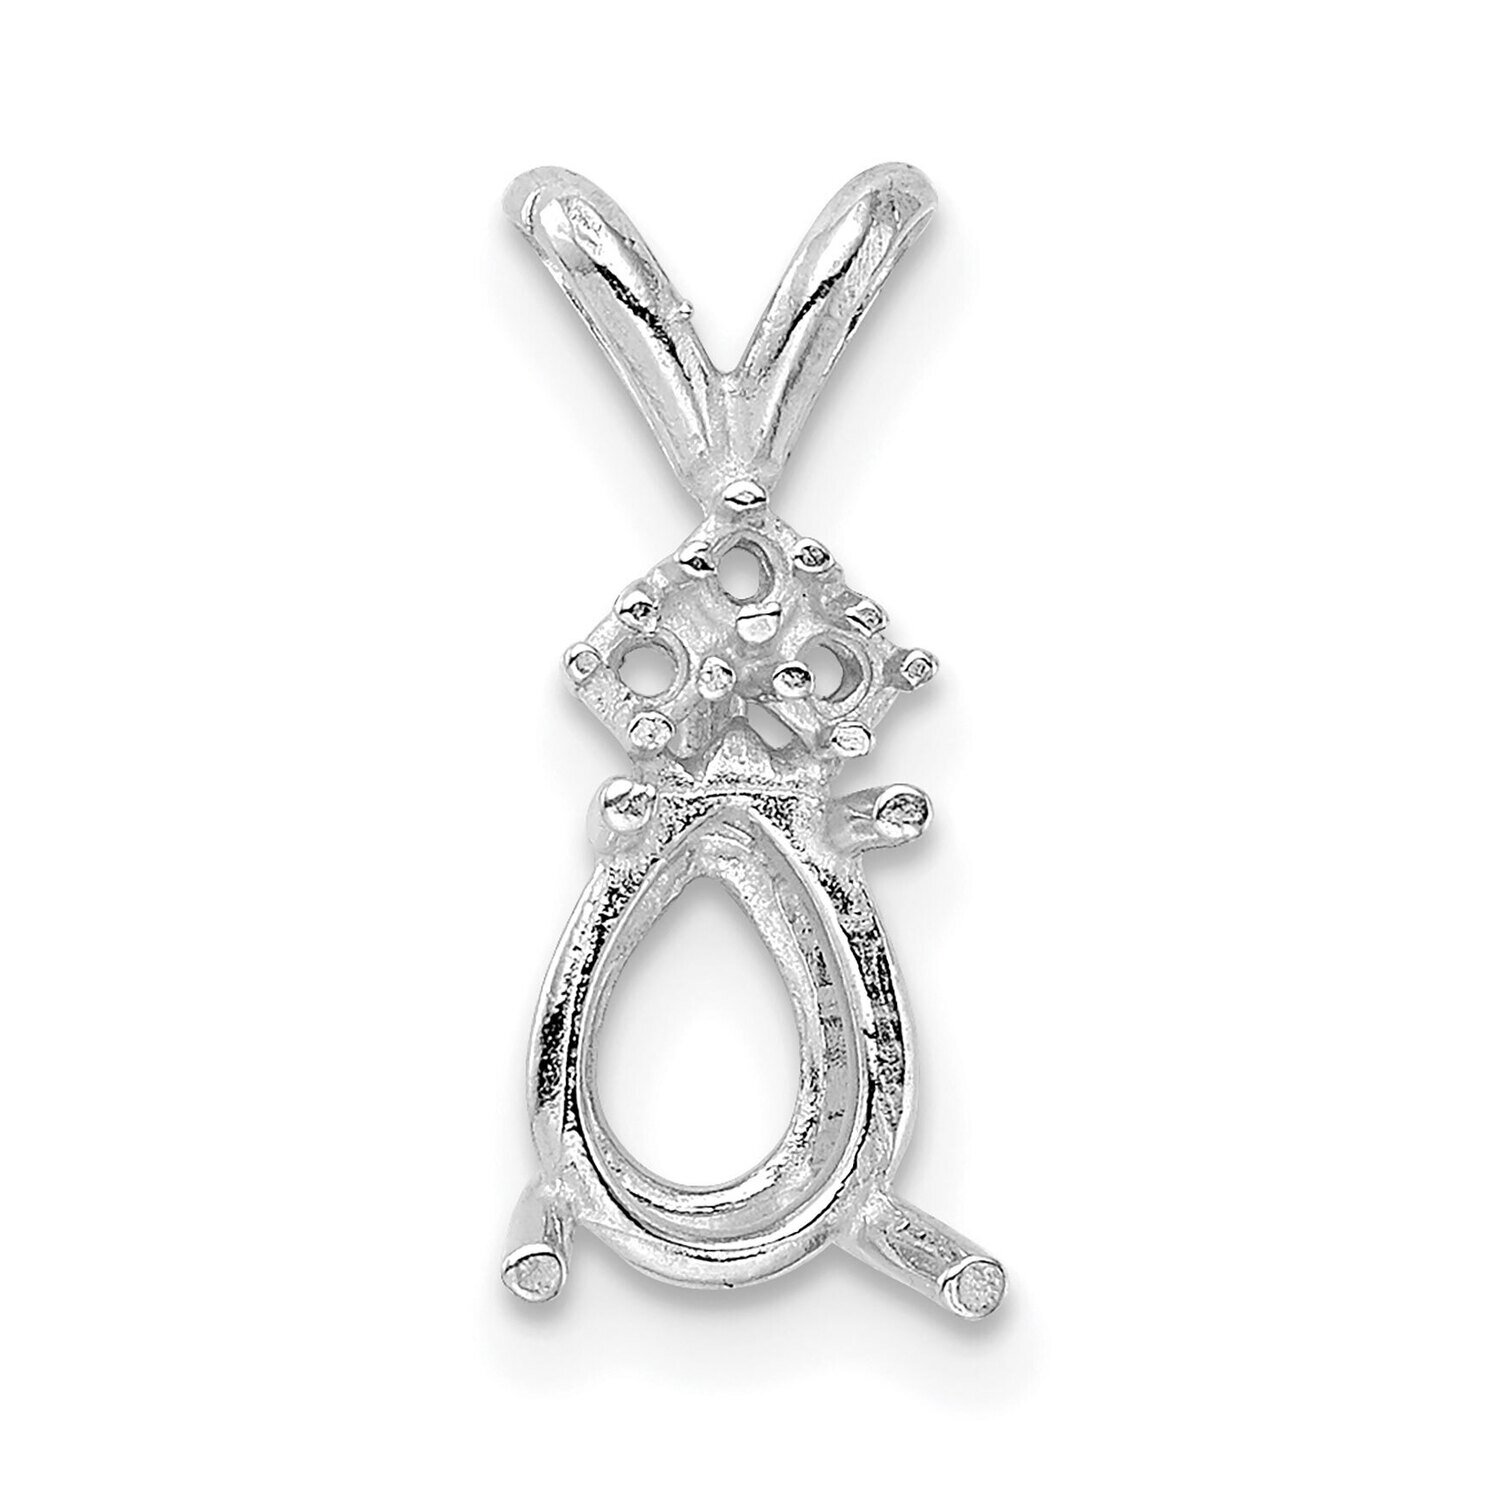 Pear 4-Prong with 3 Diamond Accent 4.5 x 2.5mm Pendant Setting 14k White Gold WG994